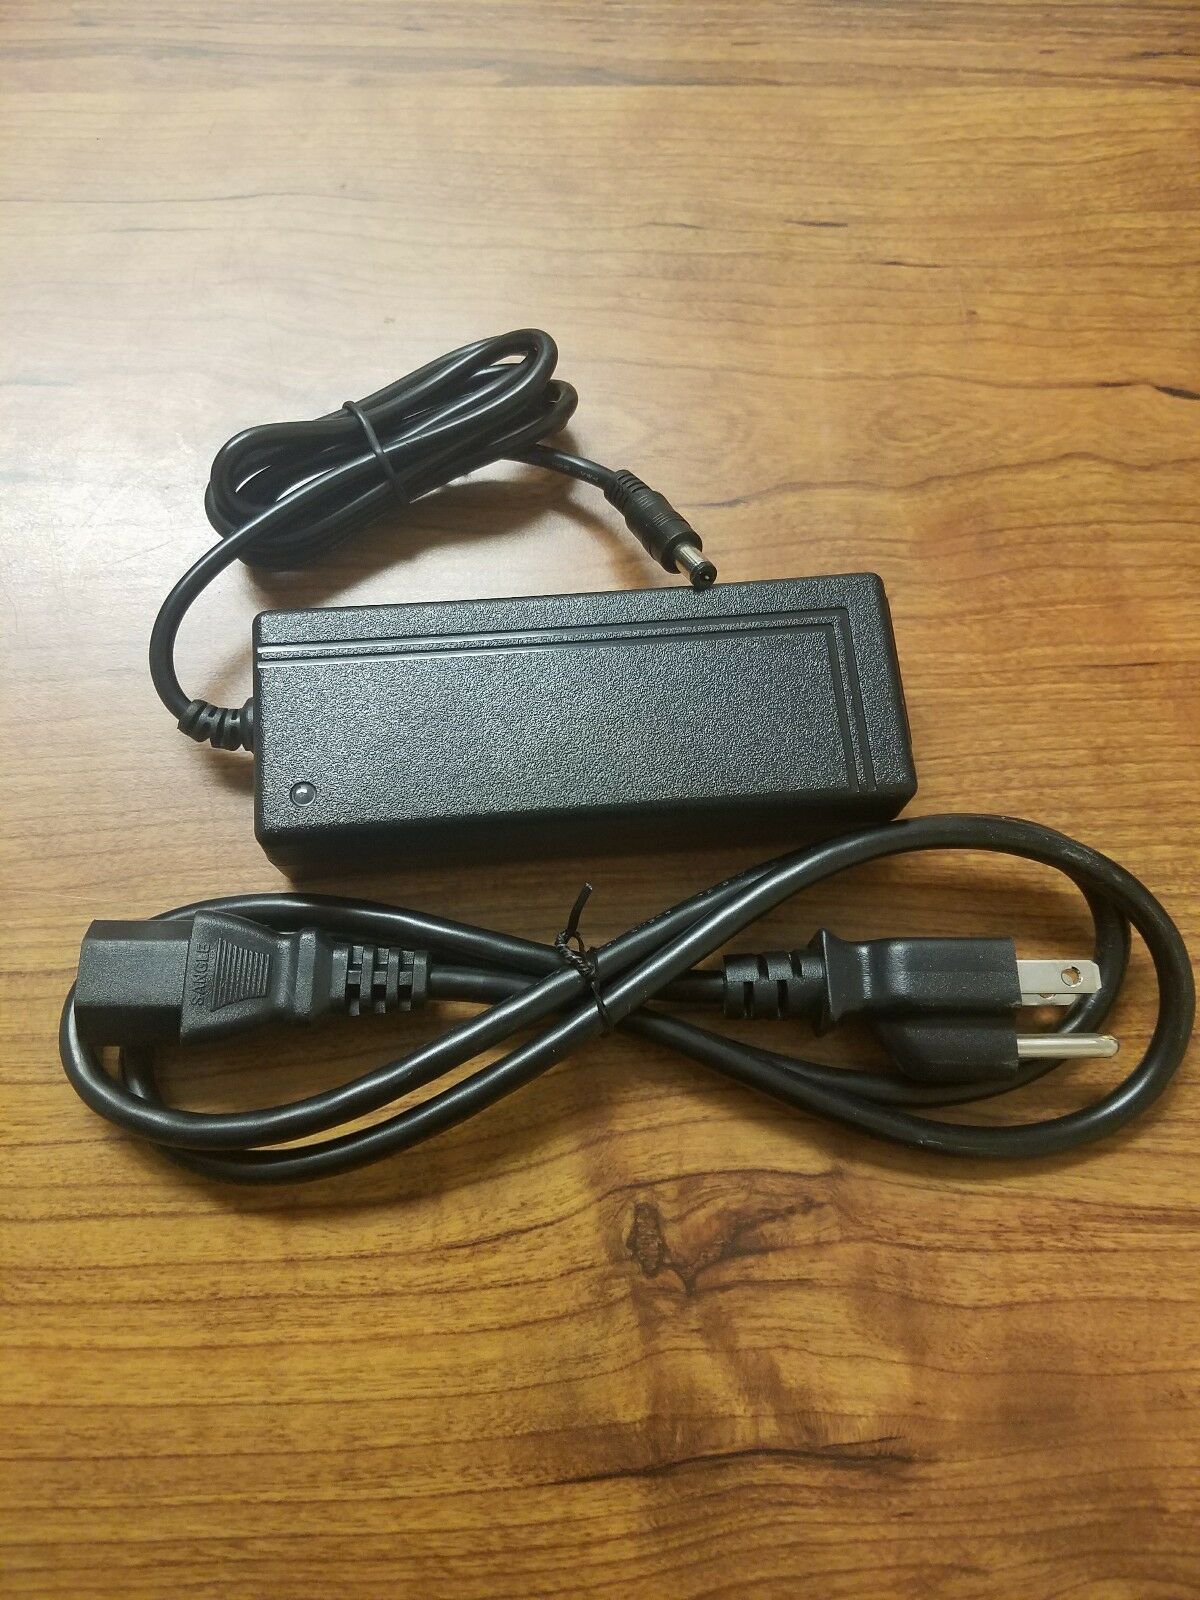 Coming Data CP1240 12V 4A Power Adapter we have thousands of these Coming Data AC power adapters. All include the power